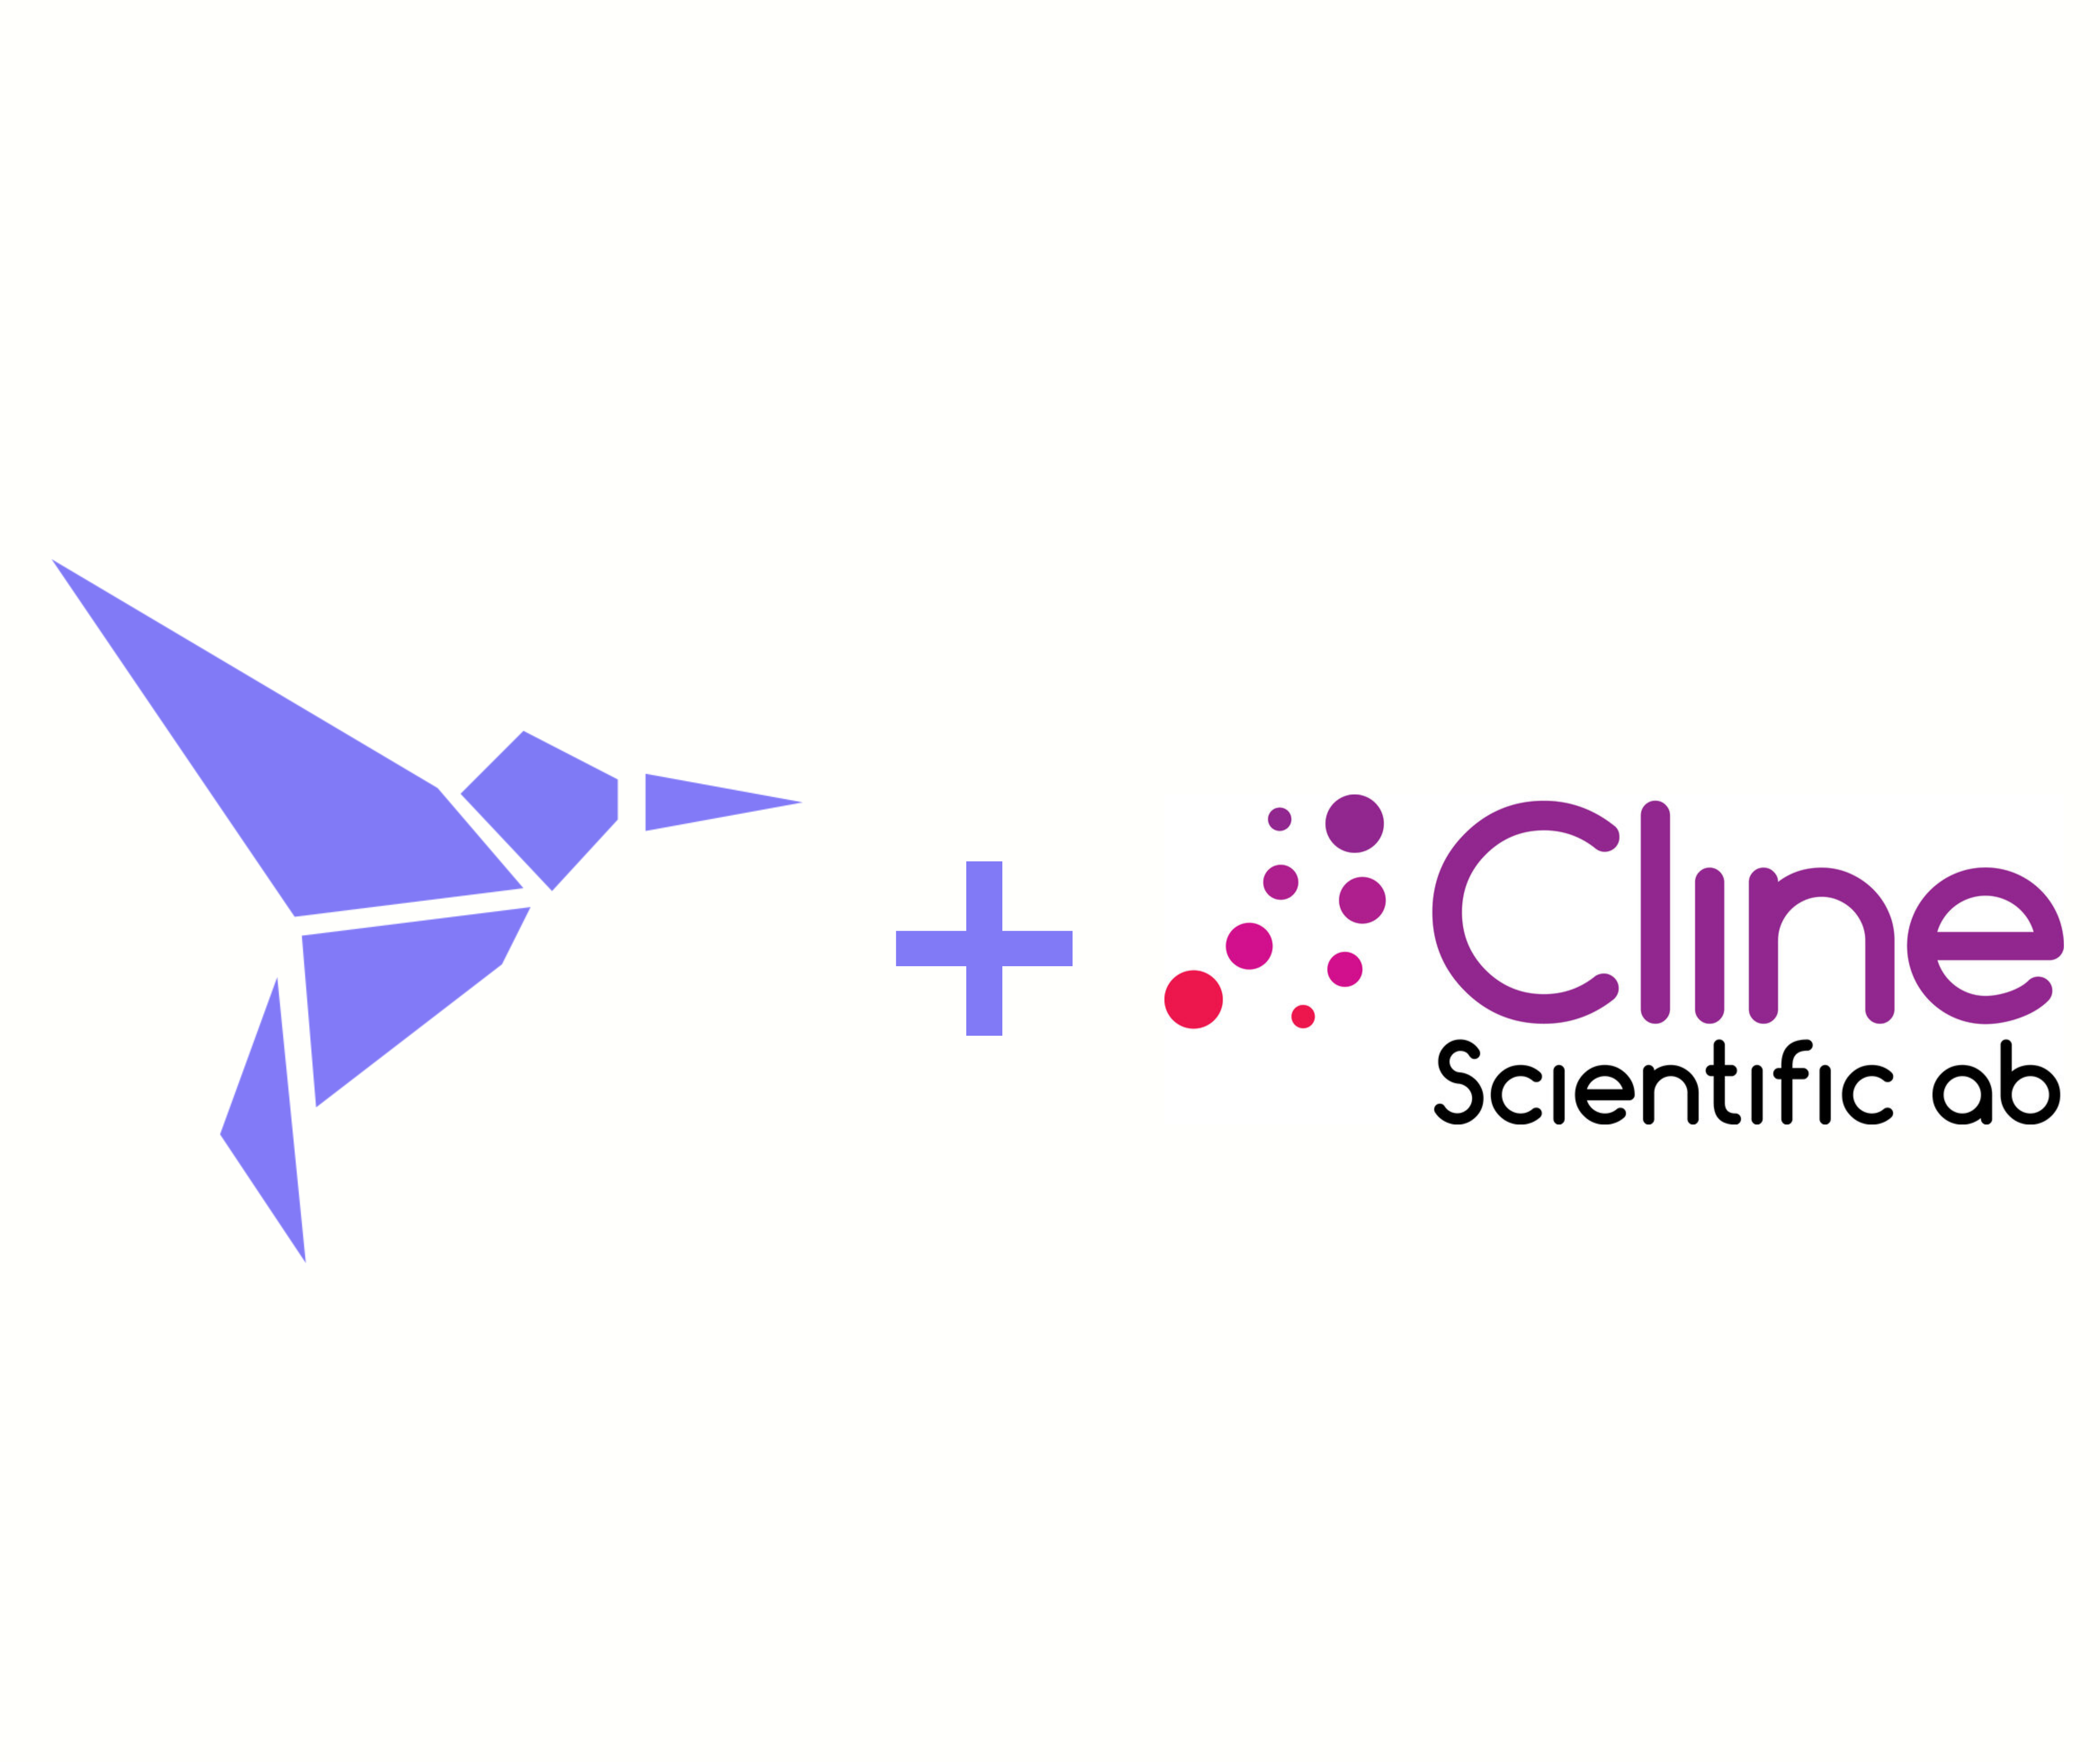 Cline starts collaboration with IFLAI in development of AI software for CellRACE project